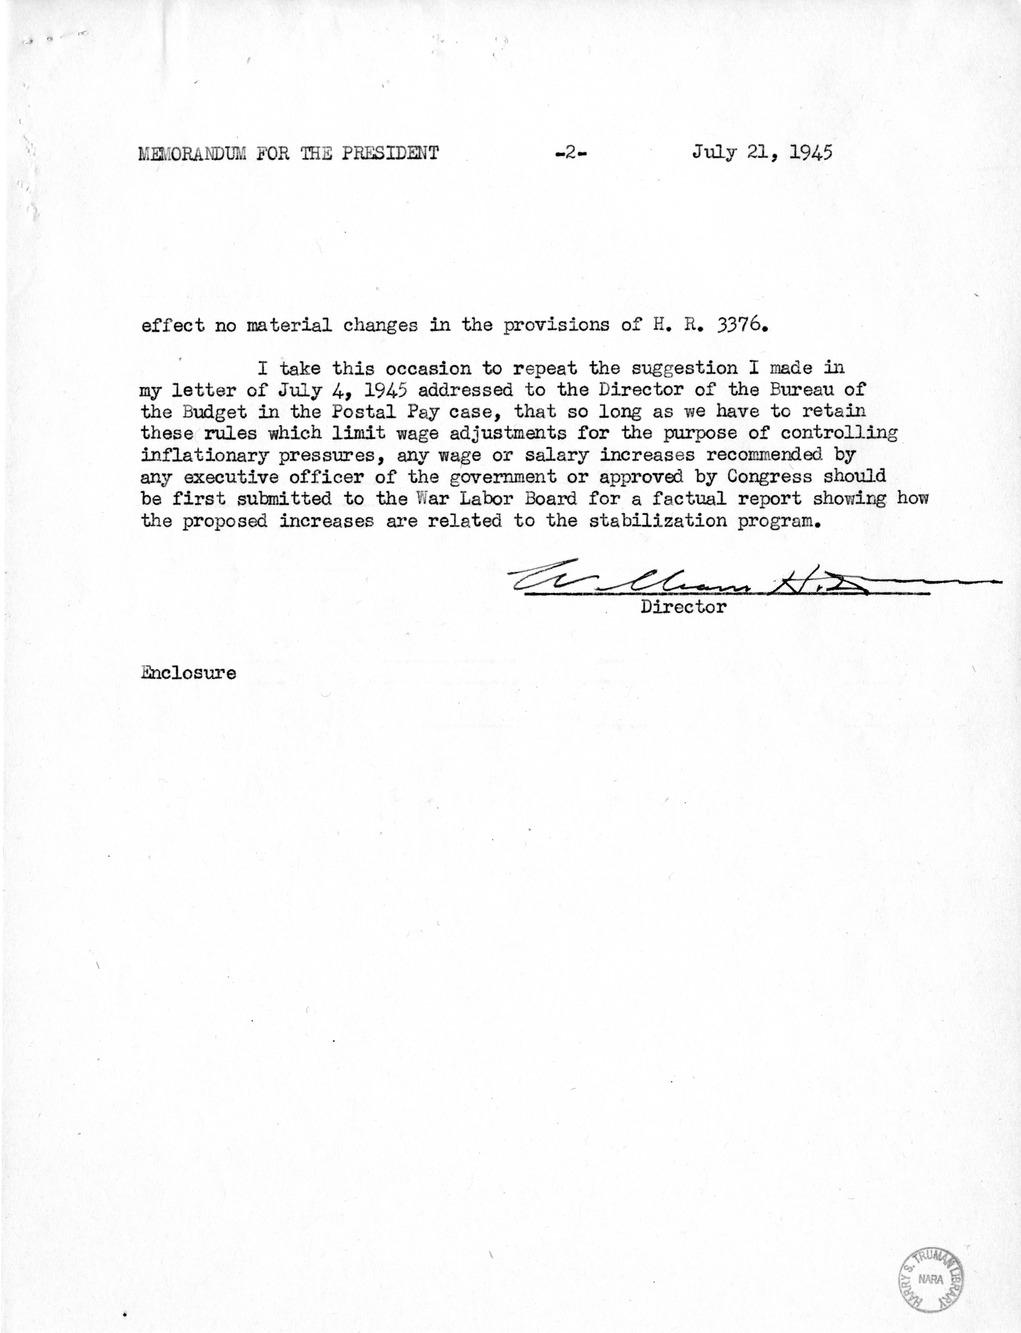 Memorandum from Harold D. Smith to M. C. Latta, H.R. 3376, To Fix and Regulate the Salaries of Teachers, School Officers, and Other Employees of the Board of Education of the District of Columbia, and for Other Purposes, with Attachments